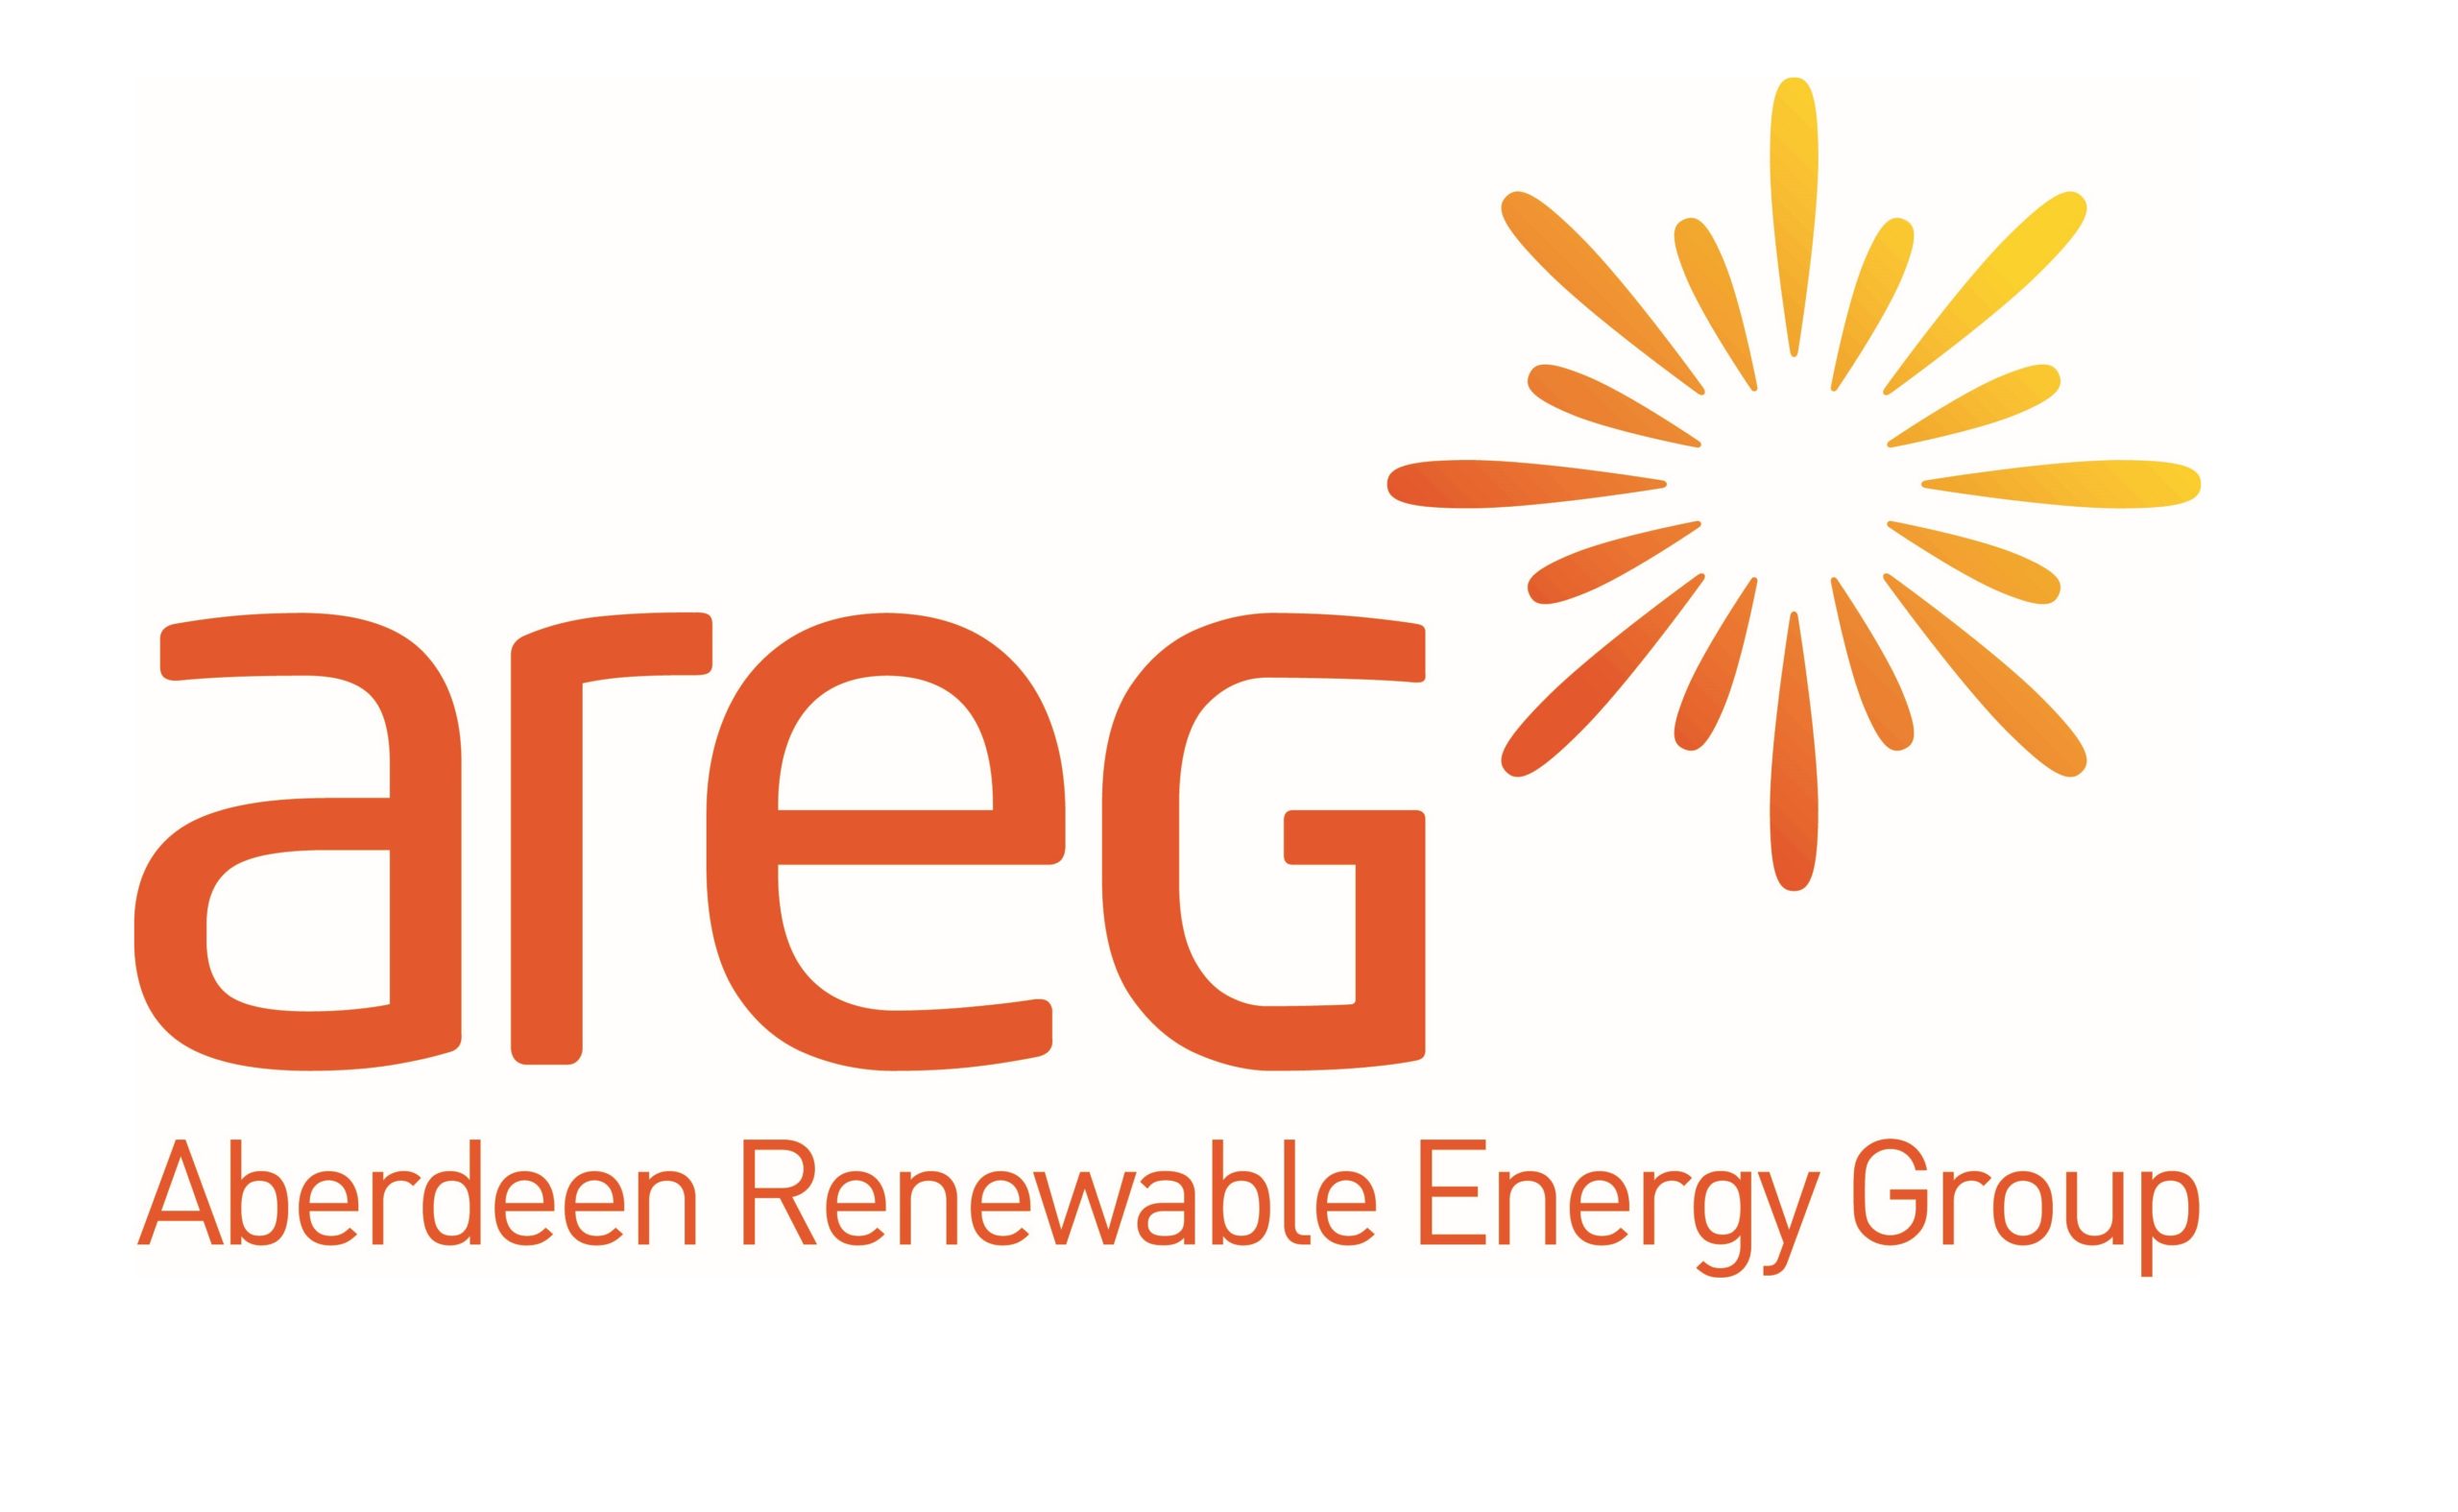 Drive for renewables sees AREG membership grow